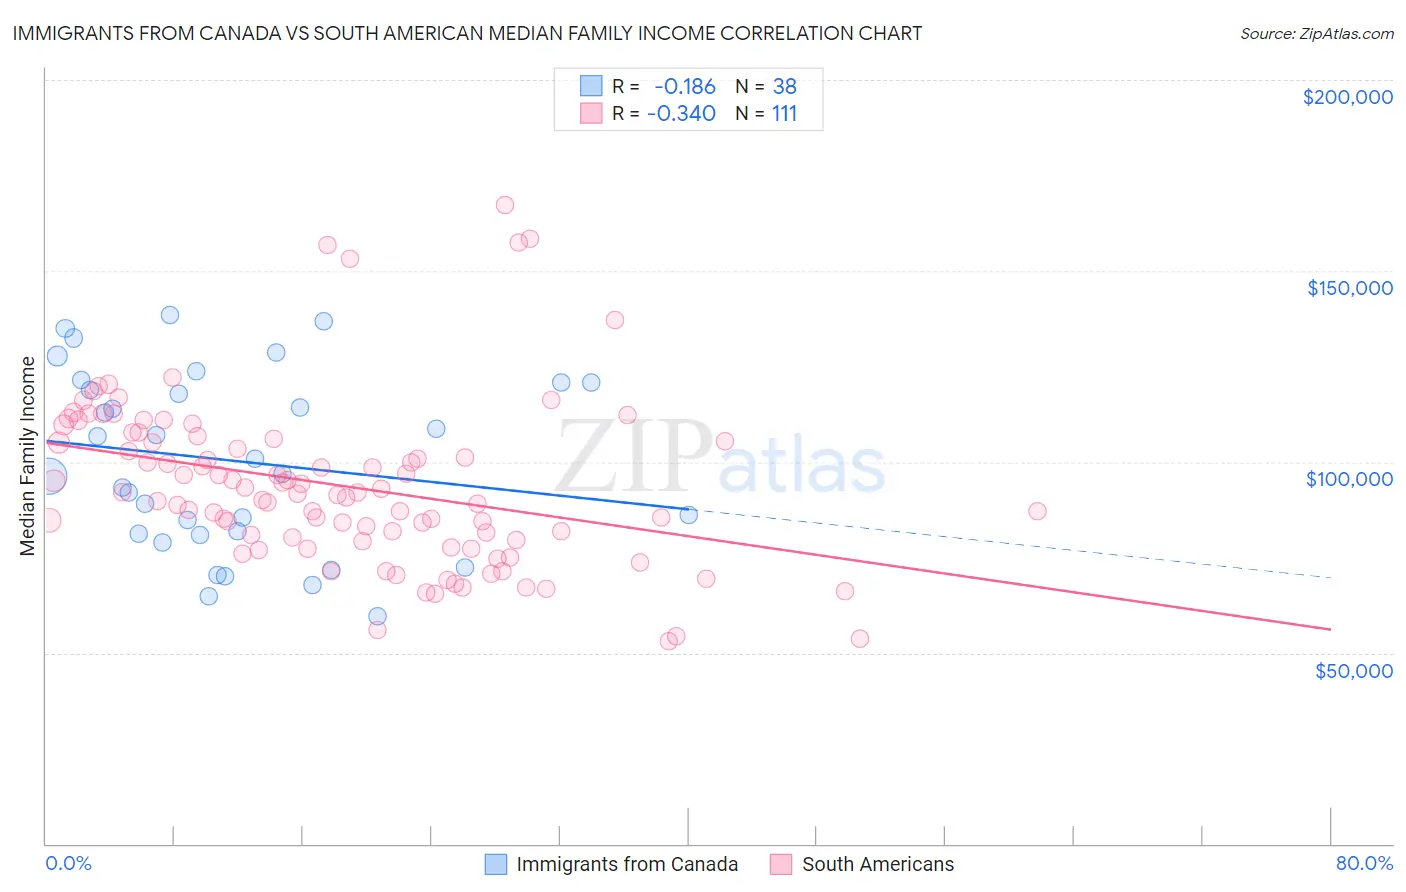 Immigrants from Canada vs South American Median Family Income